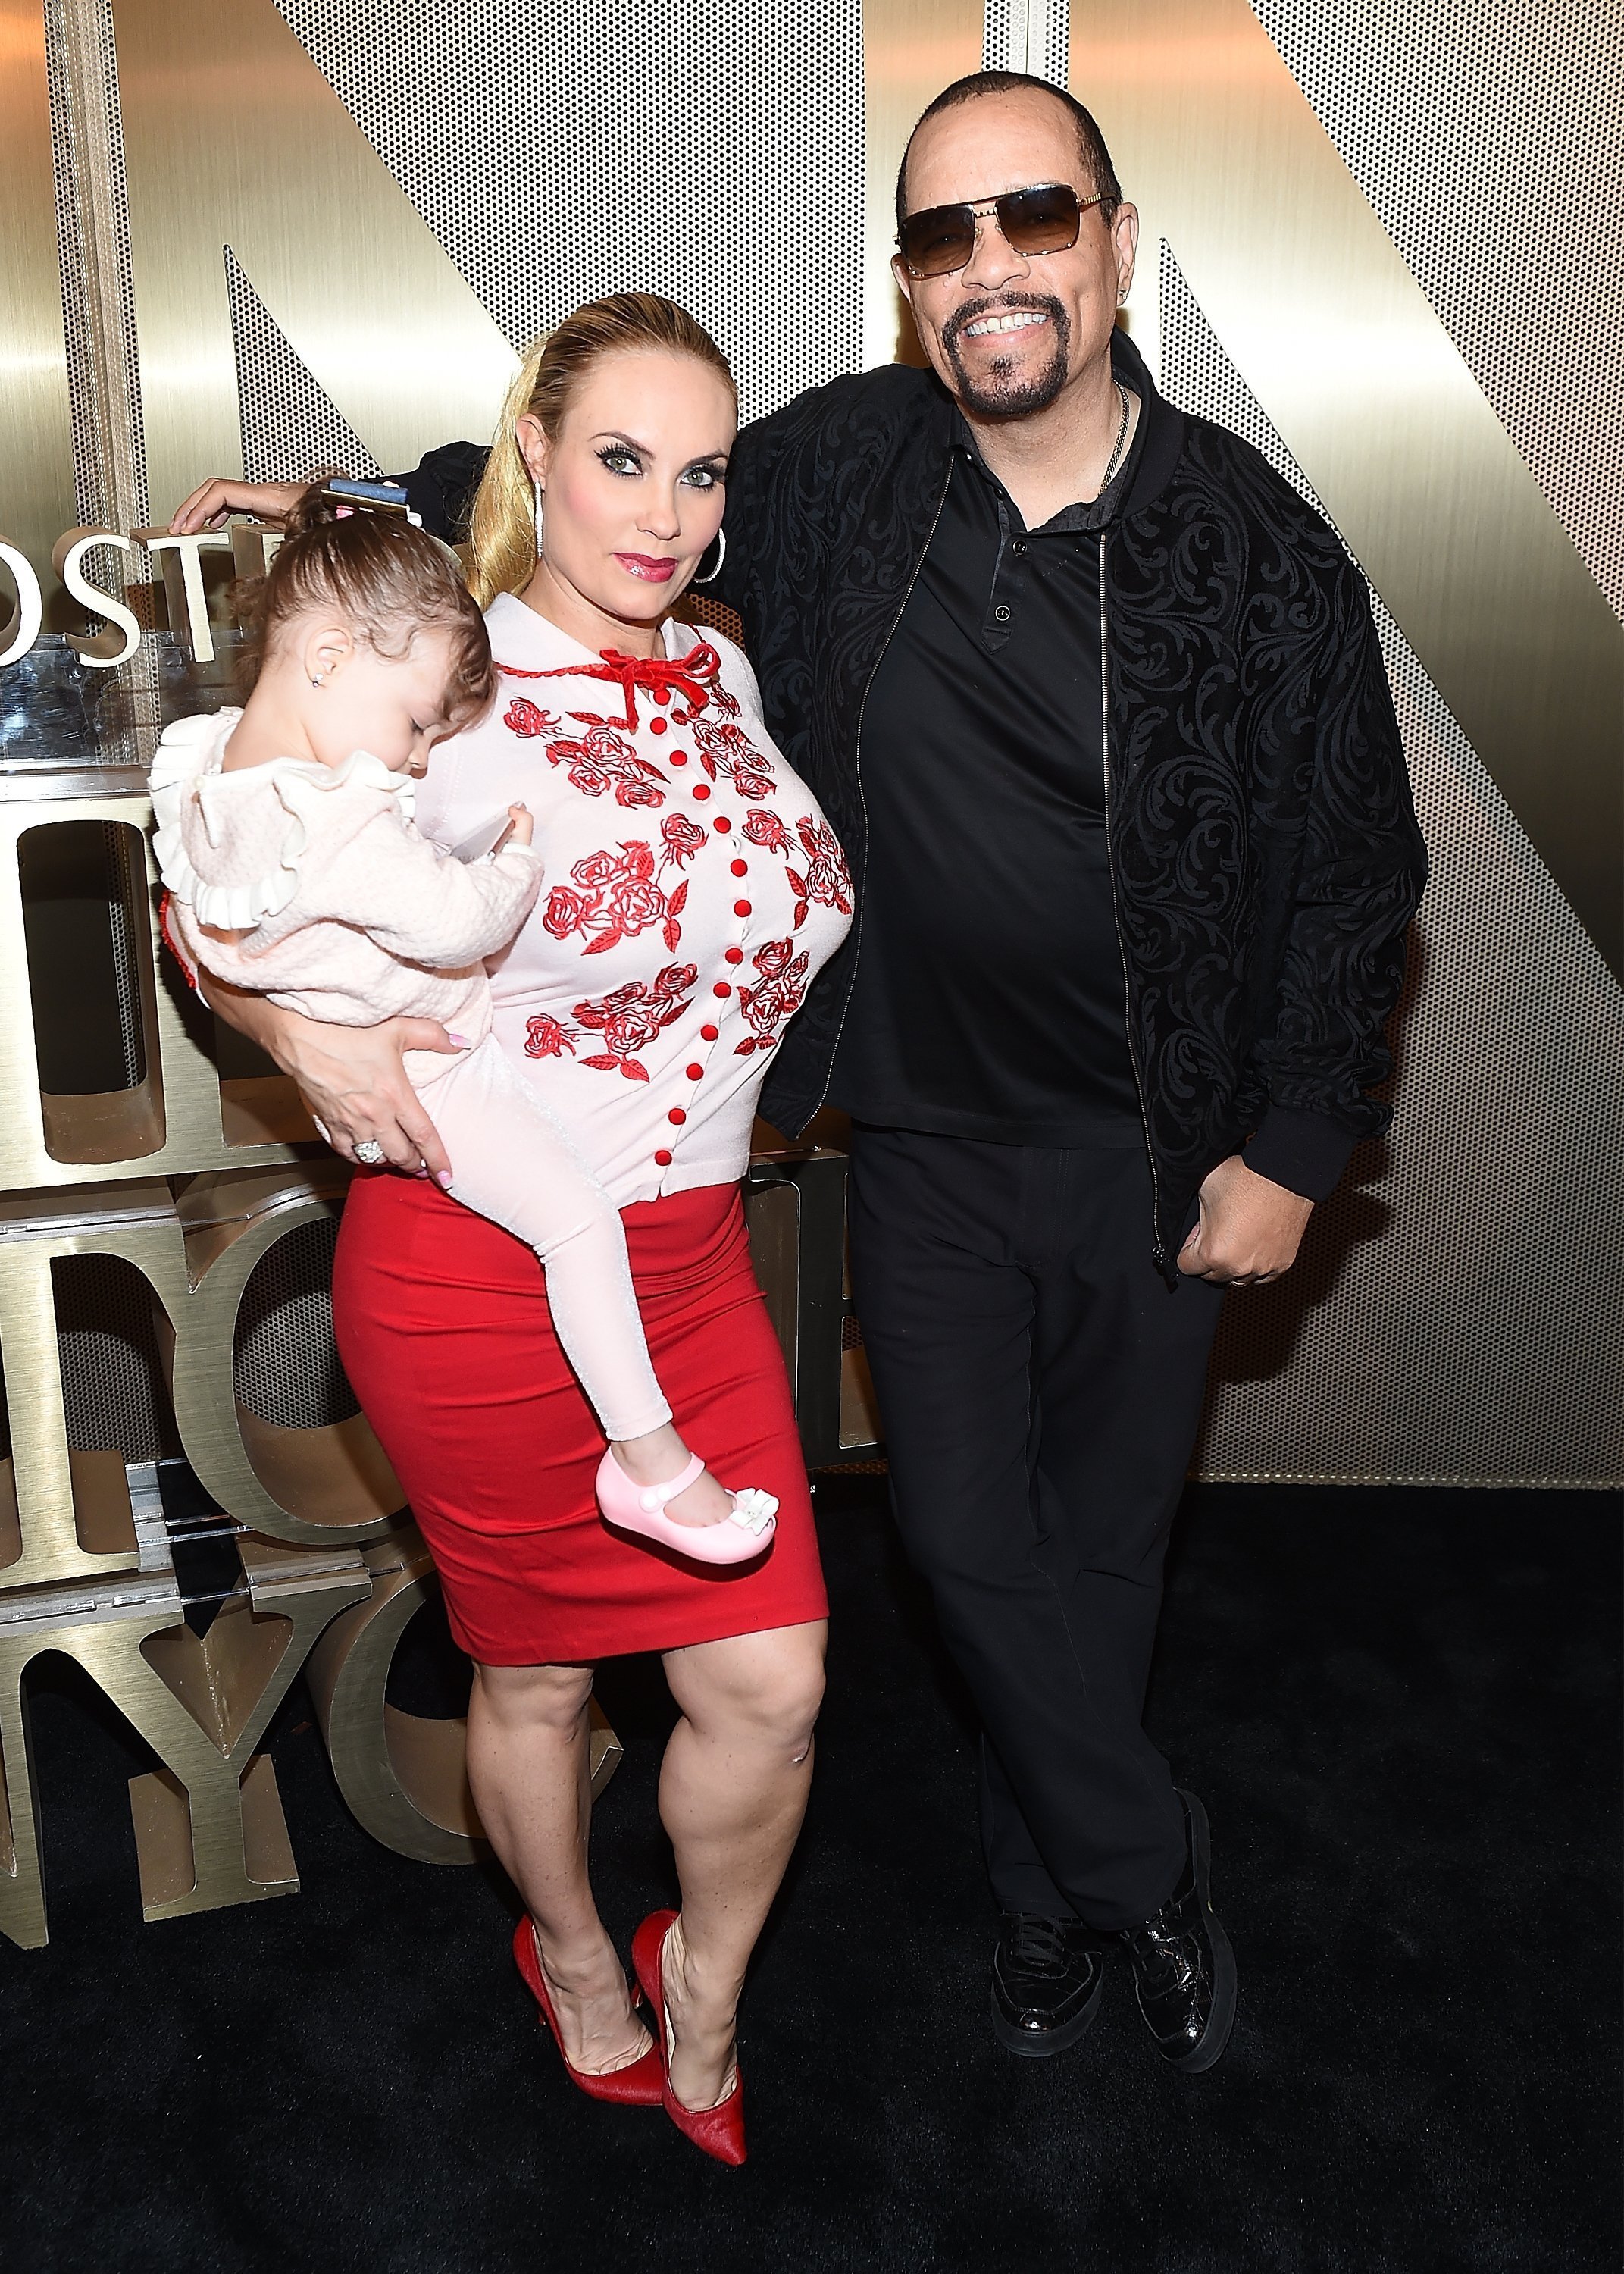 Coco Austin, Chanel, and Ice-T at the Nordstrom Men's NYC store opening on April 10, 2018 | Photo: Getty Images